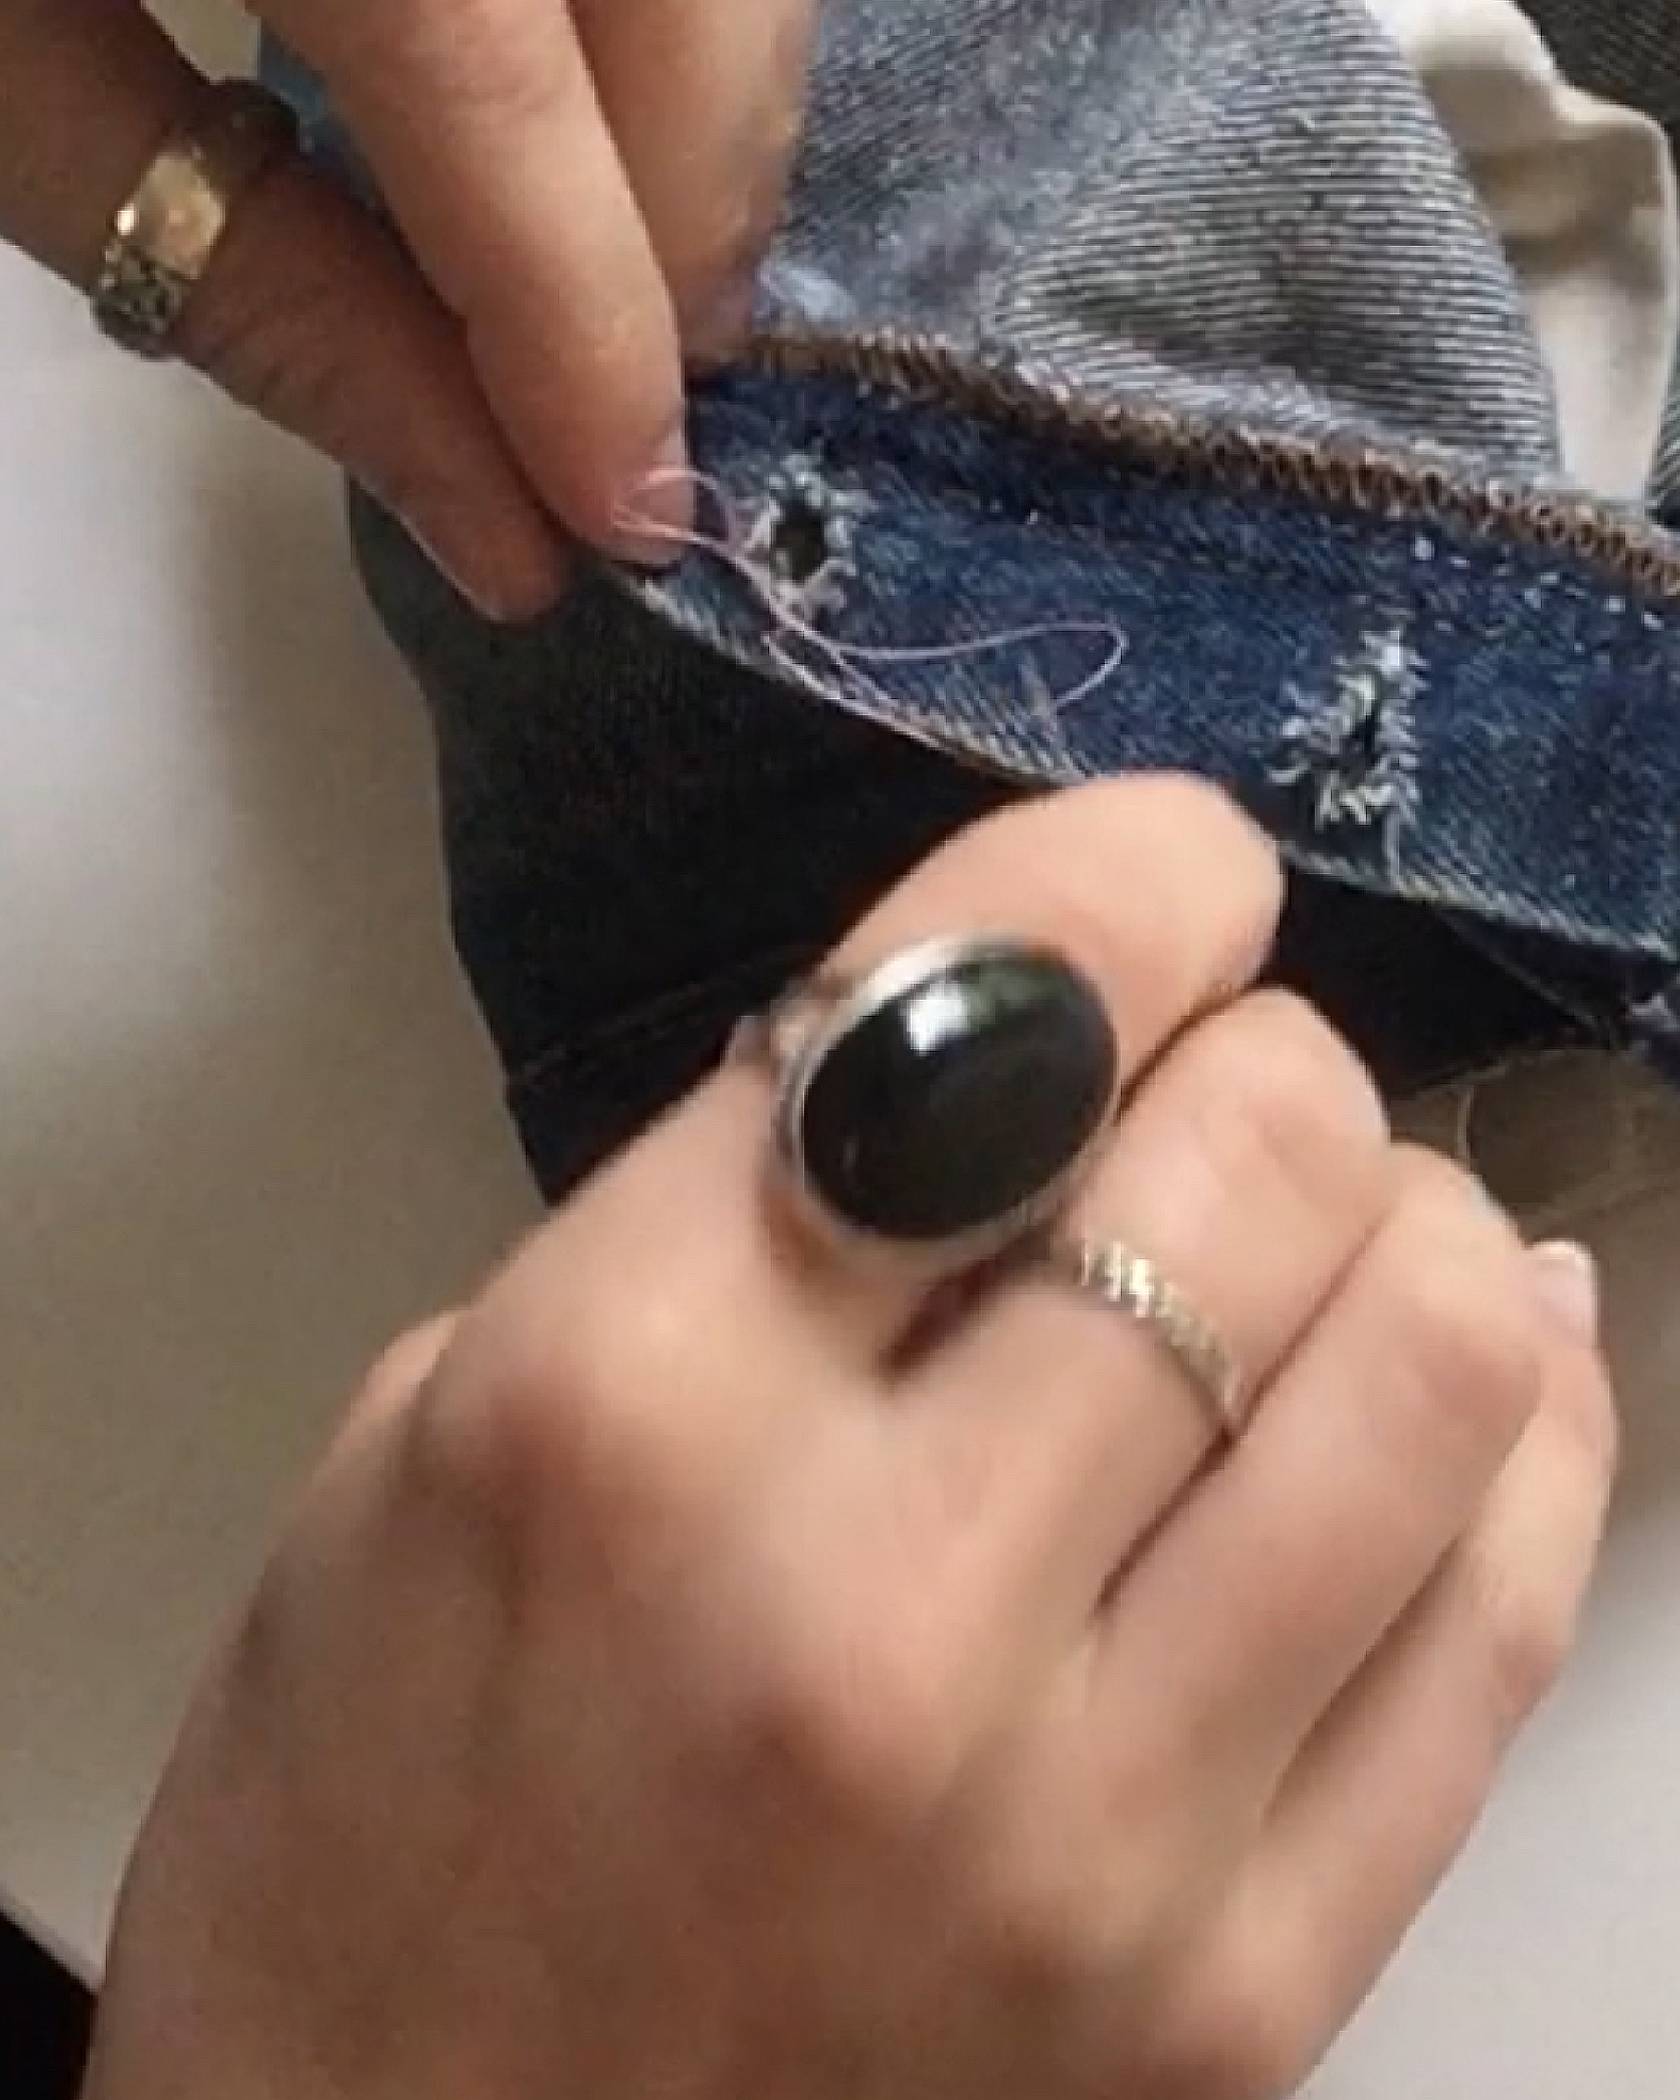 Image of the Levi's® Tailor creating a figure 8 stitch on the pair of jeans.